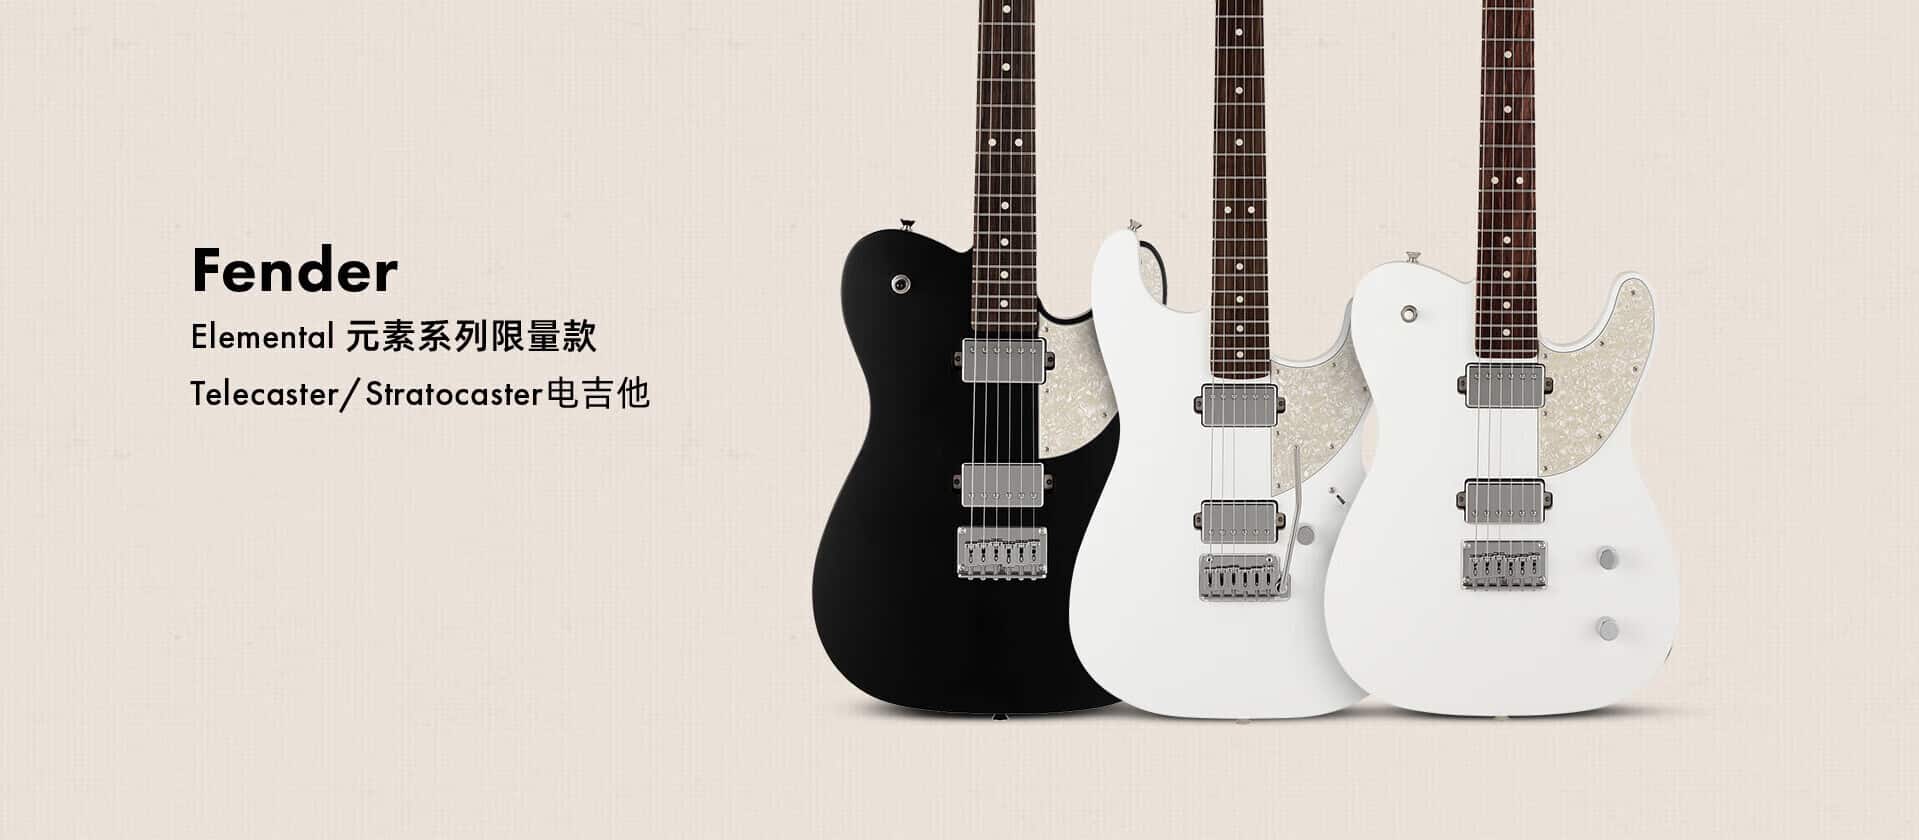 Fender Launched Online Musical Instruments Flagship Store on JD.com